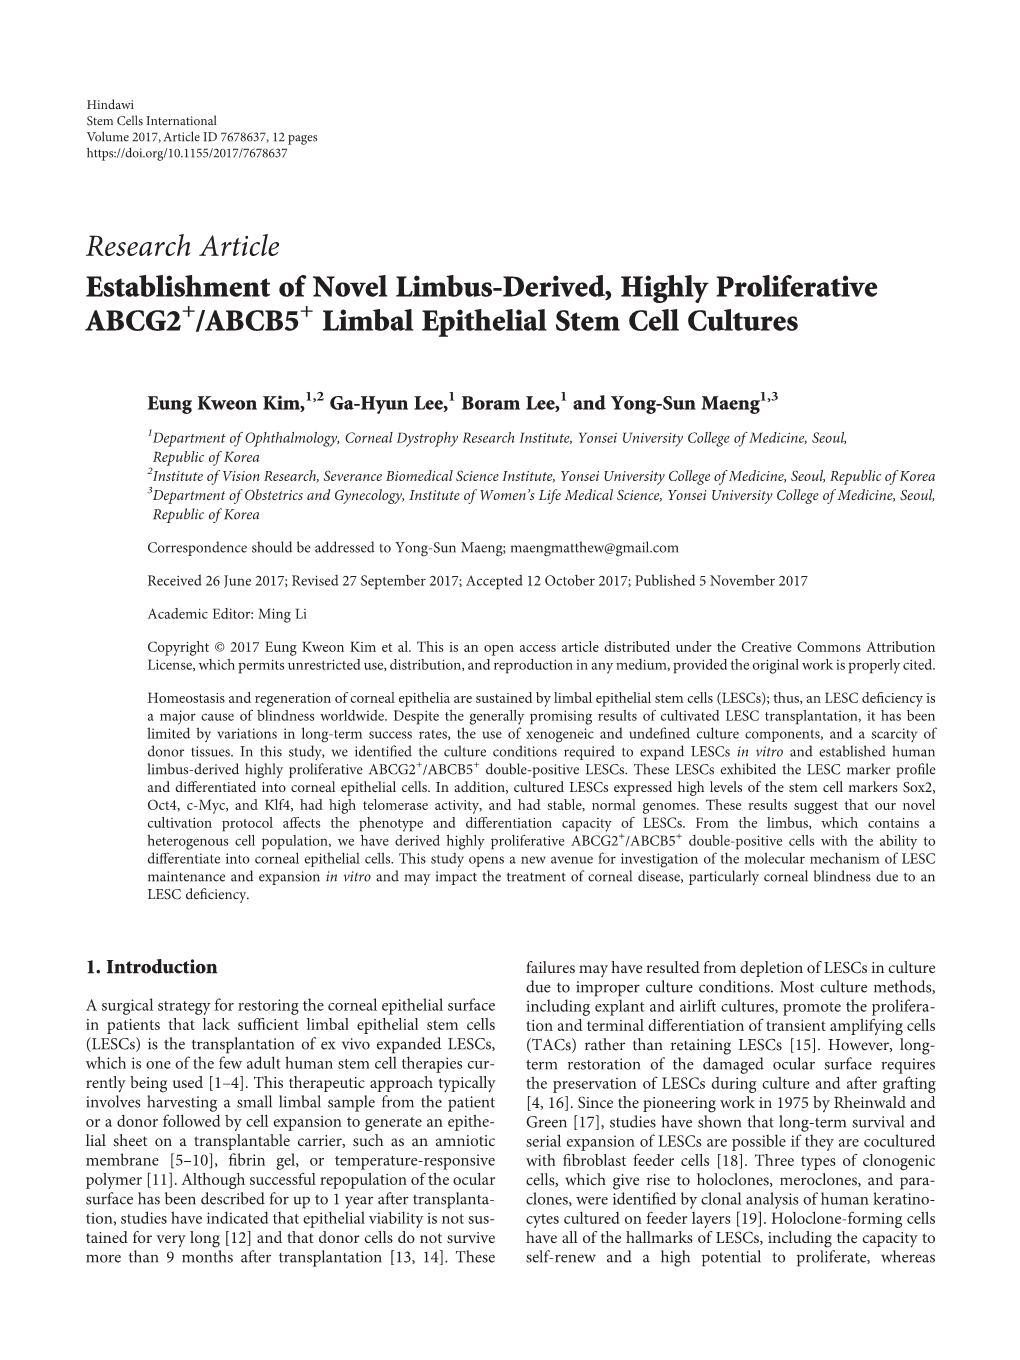 Research Article Establishment of Novel Limbus-Derived, Highly Proliferative ABCG2+/ABCB5+ Limbal Epithelial Stem Cell Cultures